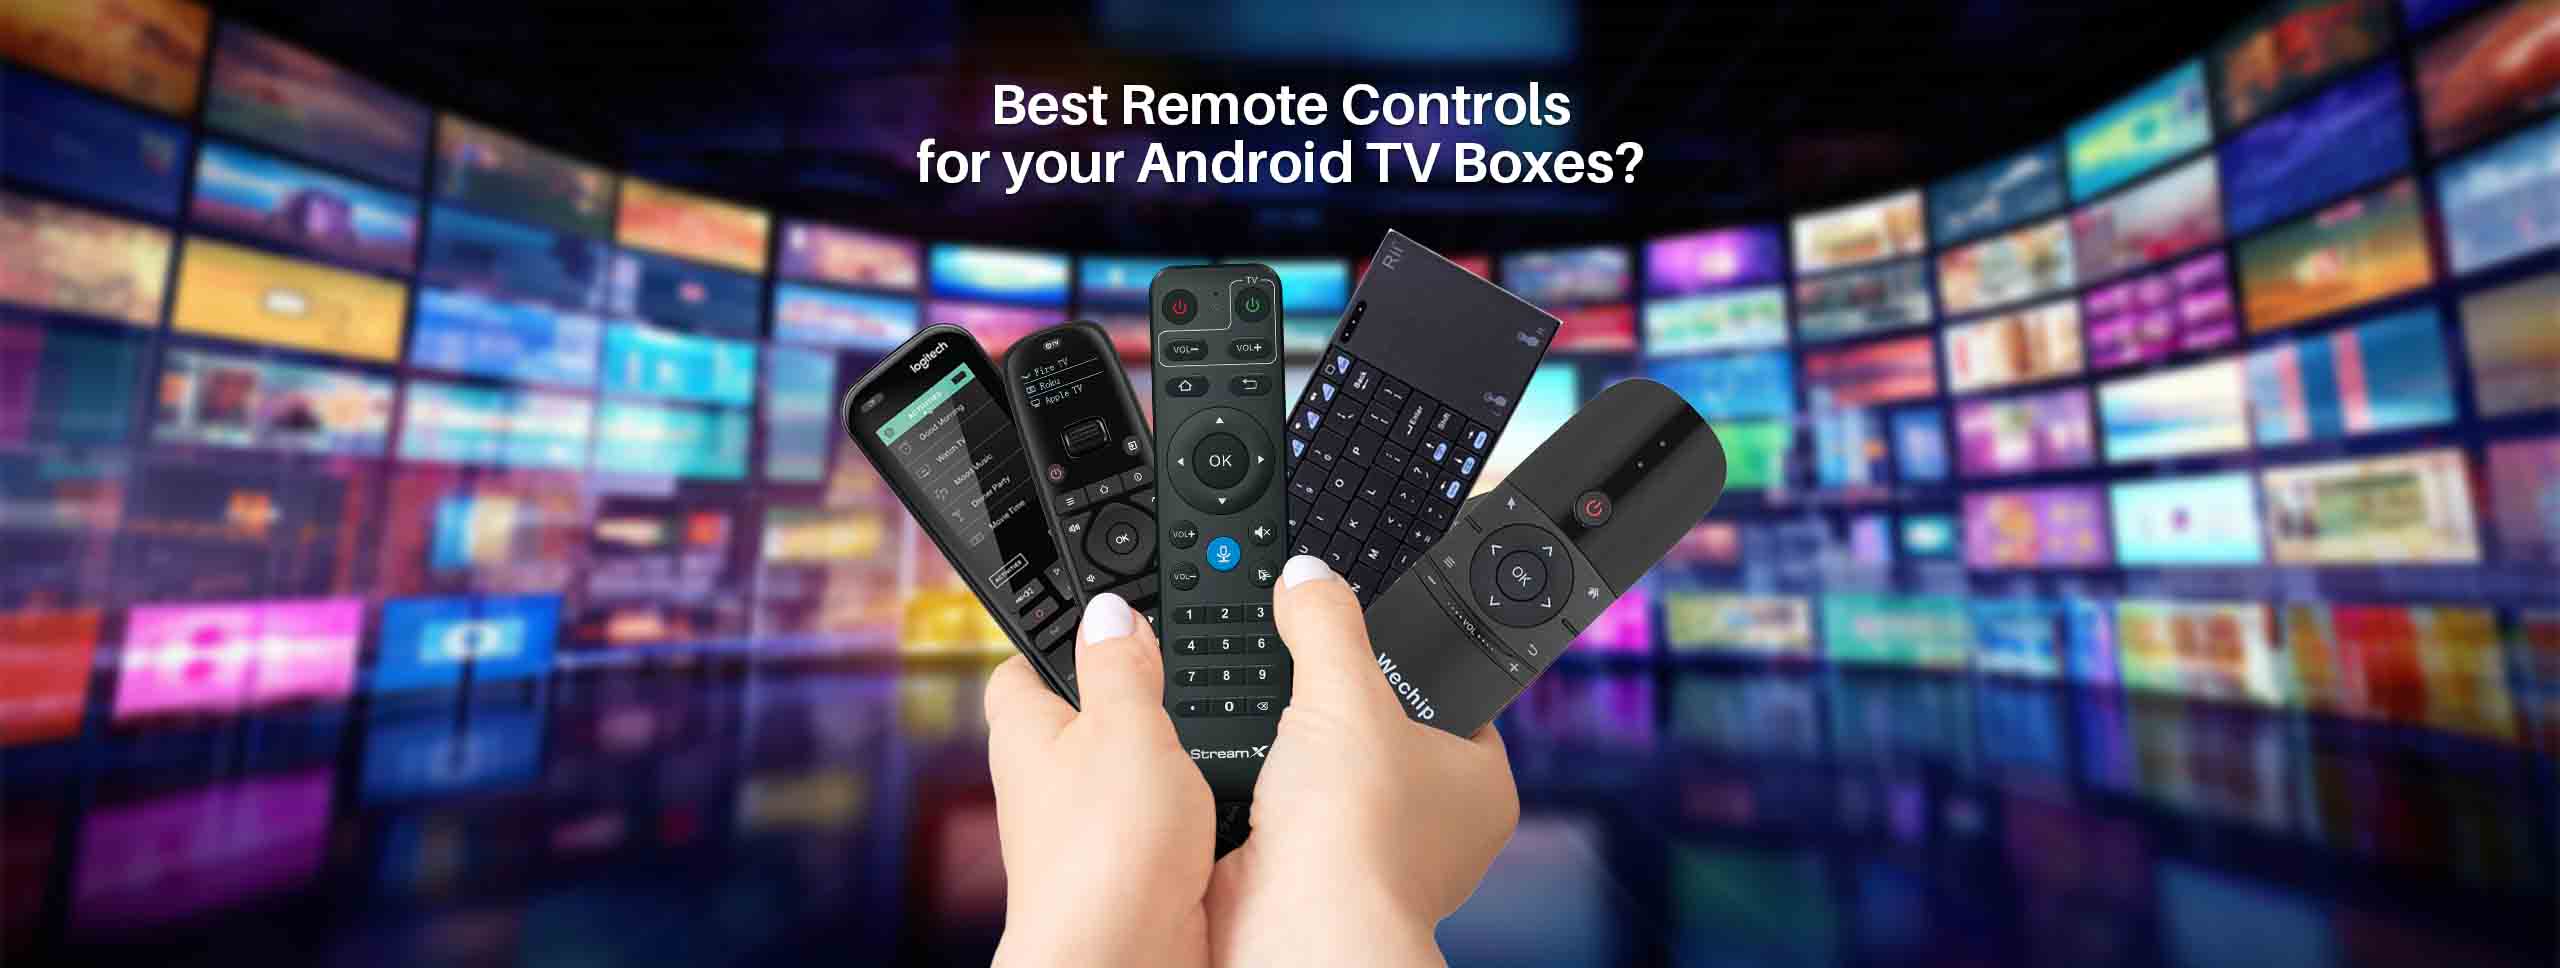 Best-Remote-Controls-for-your-Android-TV-Boxes